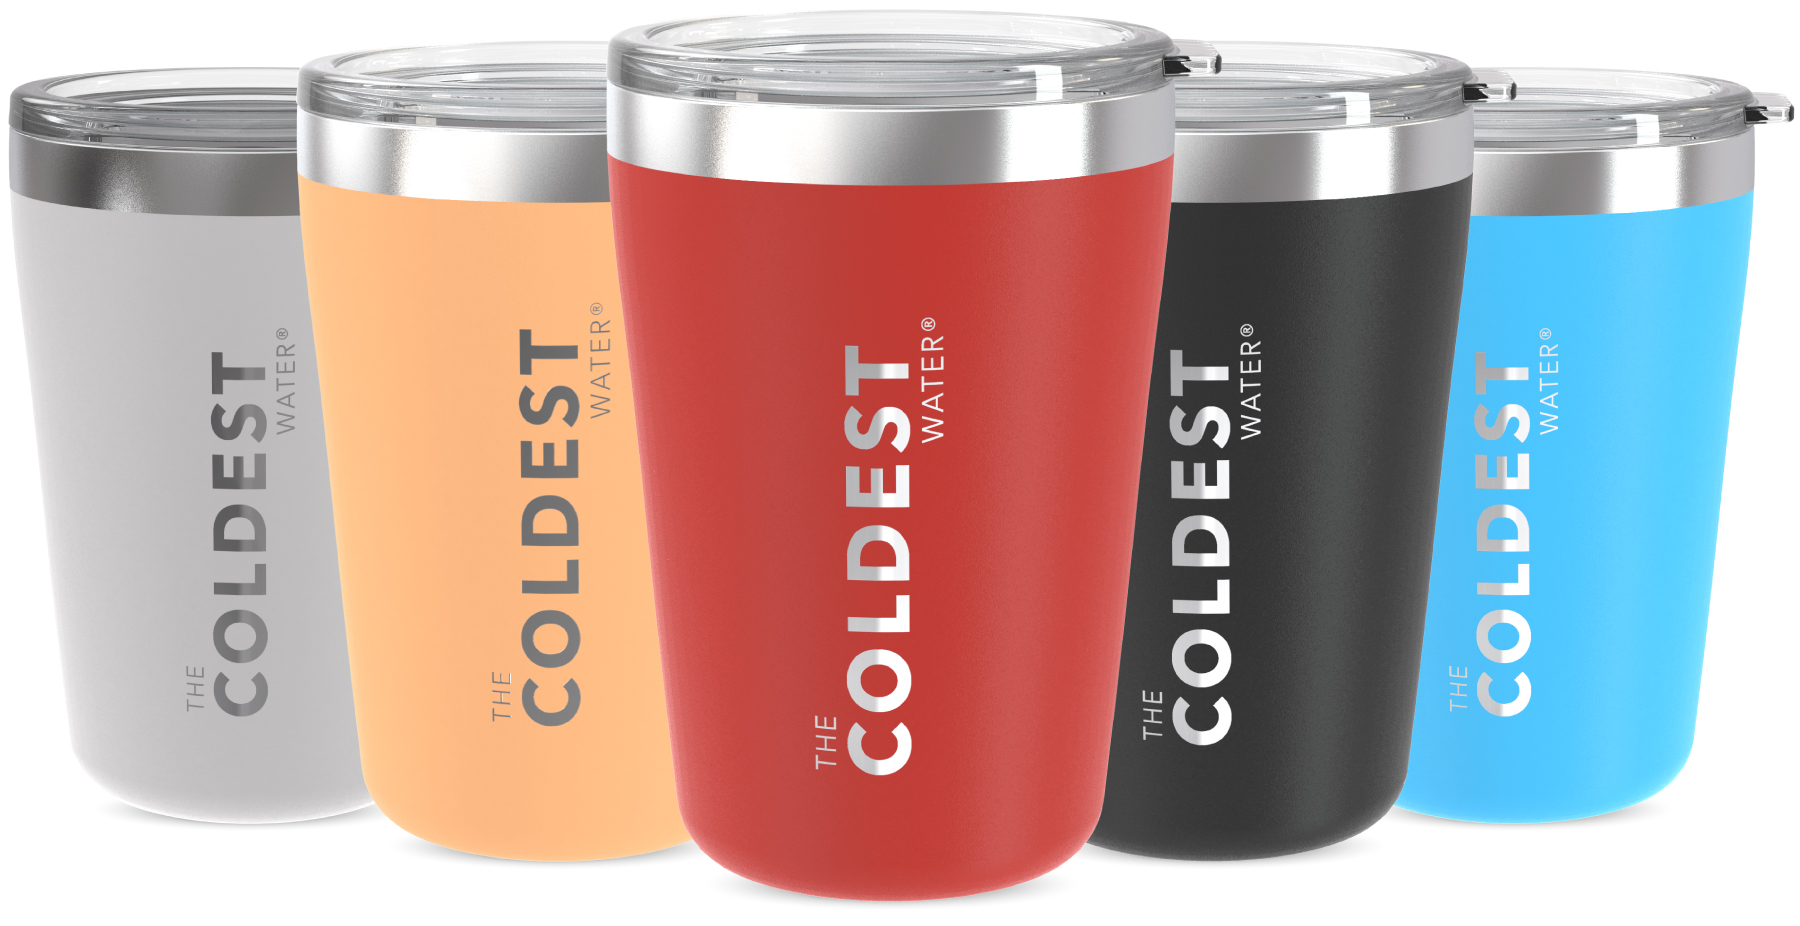 Water　Travel　Lid　20　Reusable　Stainless　Mug　oz　Iced　Insulated　Bottle　Coffee　Sliding　with　Cup　Tumbler　COLDEST　Steel